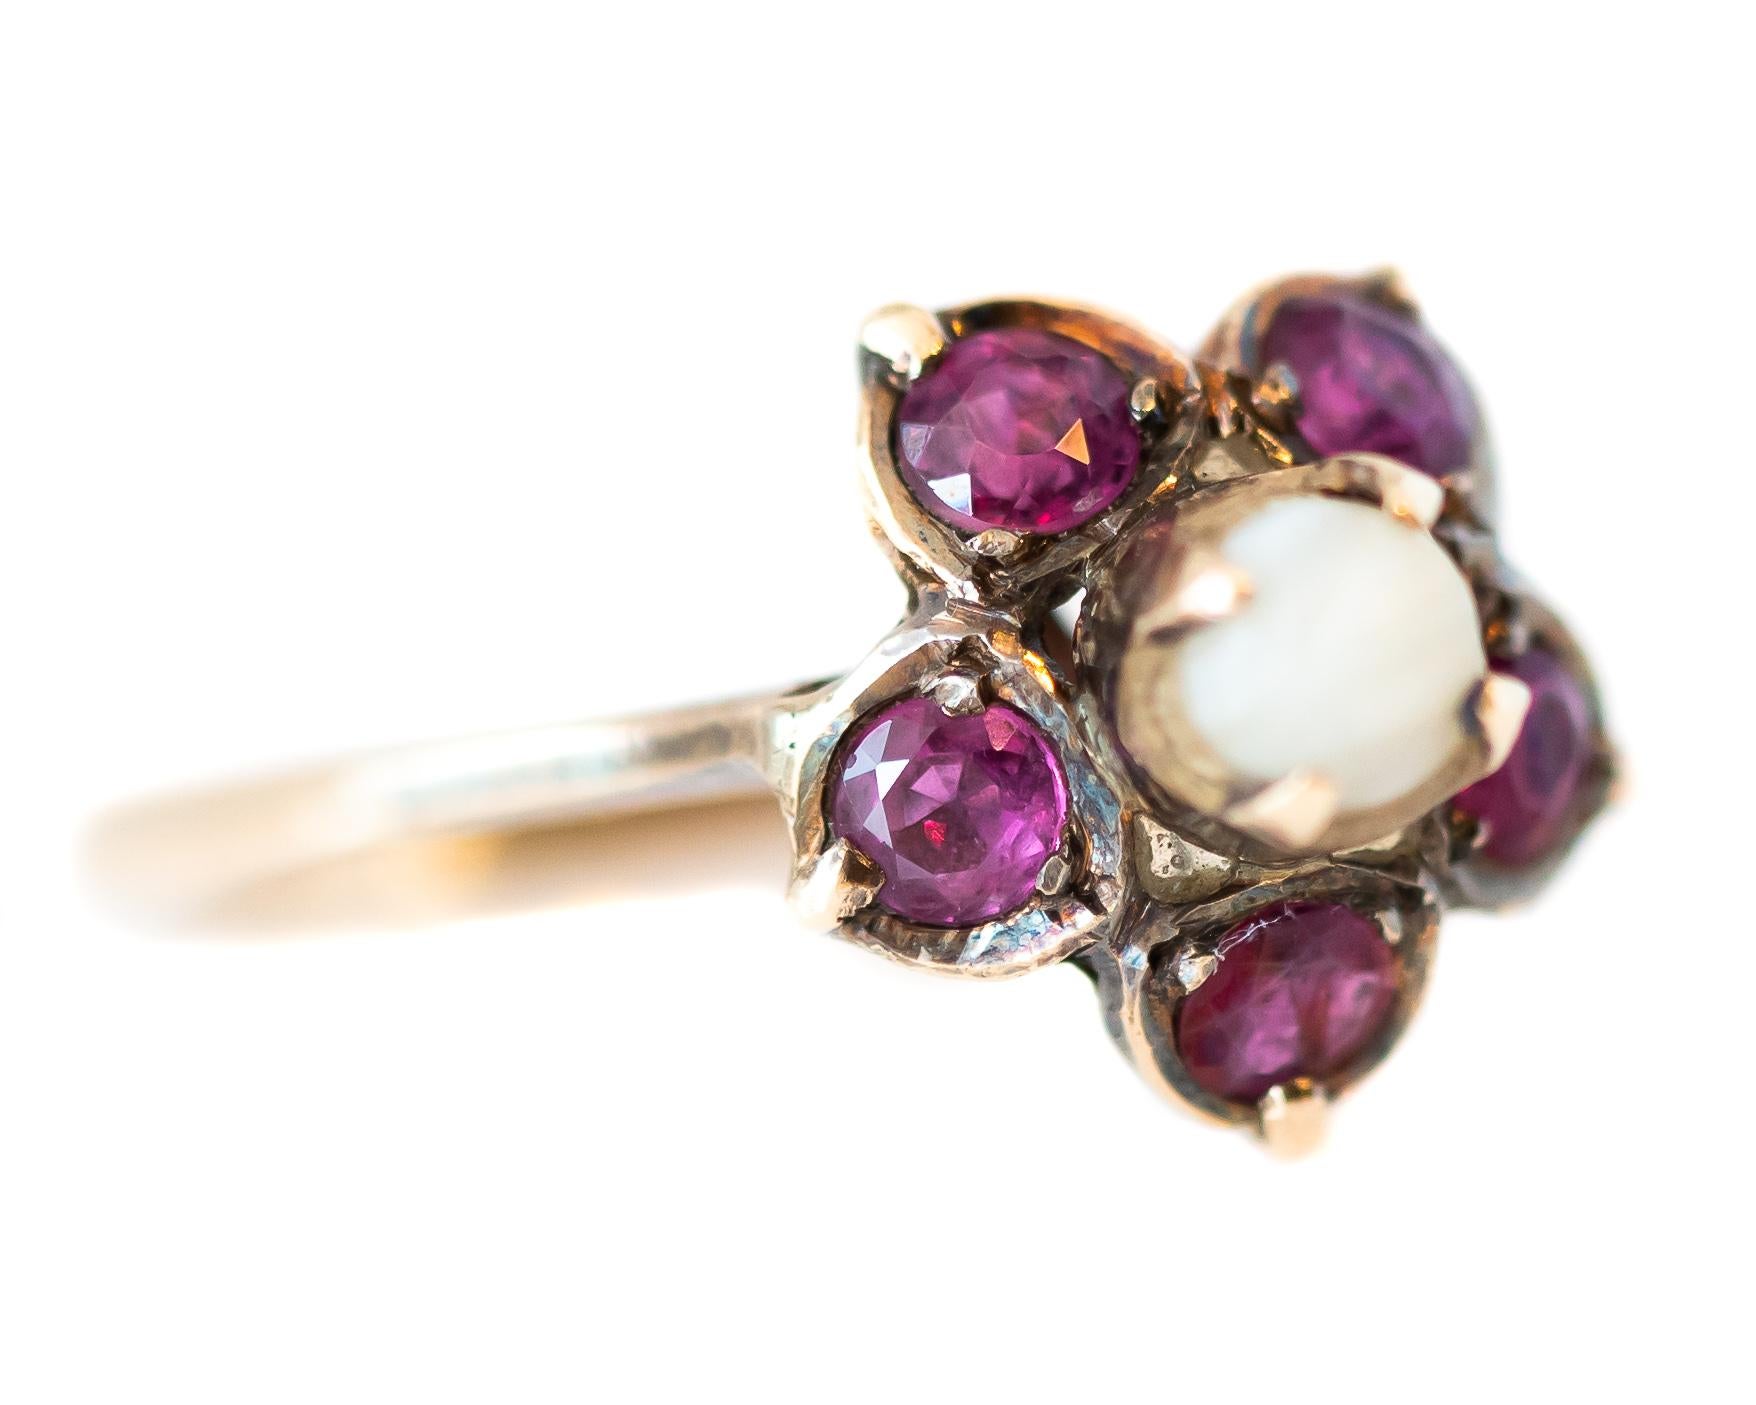 Antique Circa 1880 Ruby and Pearl Floral Ring - 18 Karat Yellow Gold, Rubies, Pearl

Features:
Floral Design
Round Pearl Center
5 pinkish red Round Ruby-set petals
18 Karat Yellow Gold, with a light patina
Elevated setting with Open Back
Prong set